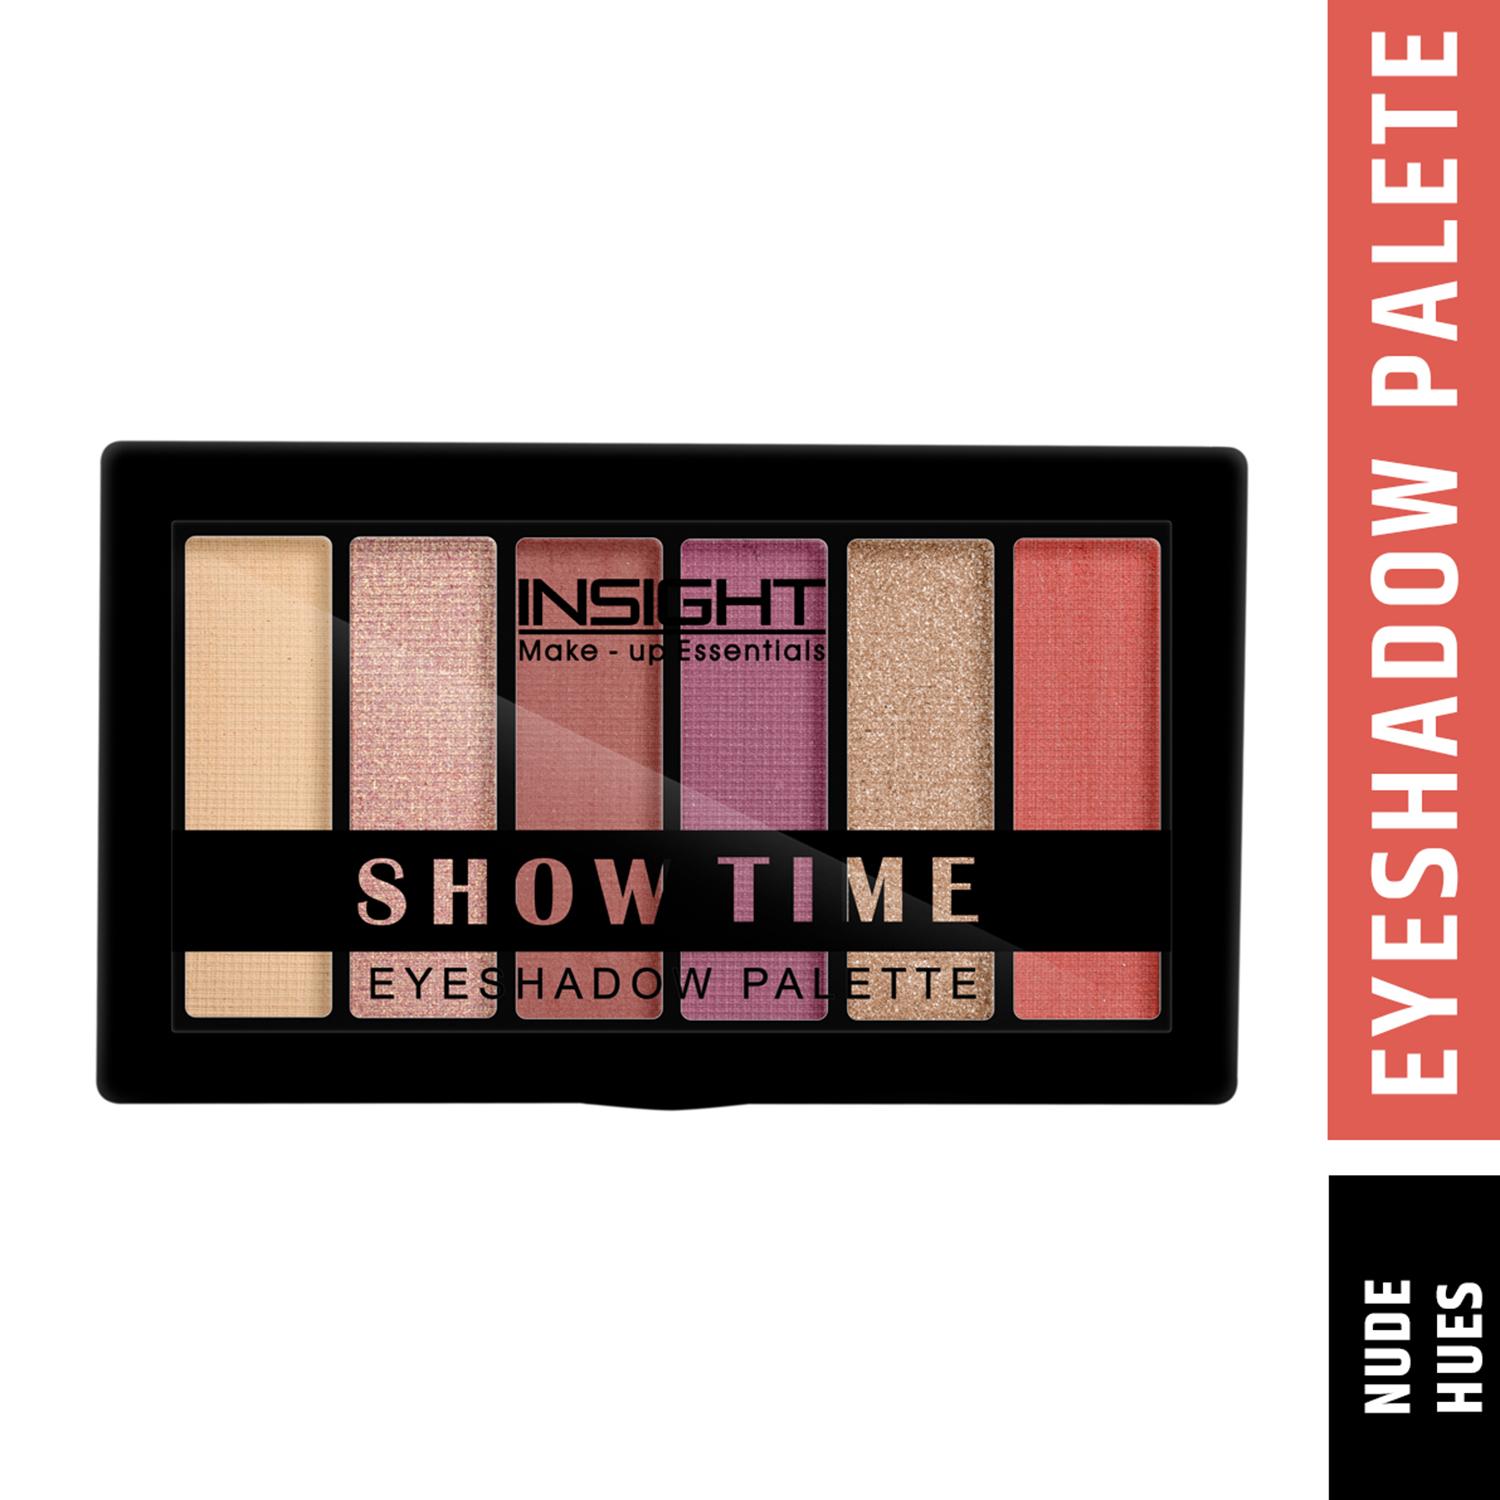 Insight Cosmetics | Insight Cosmetics Show Time Eyeshadow Palette - Nude Hues (15g)